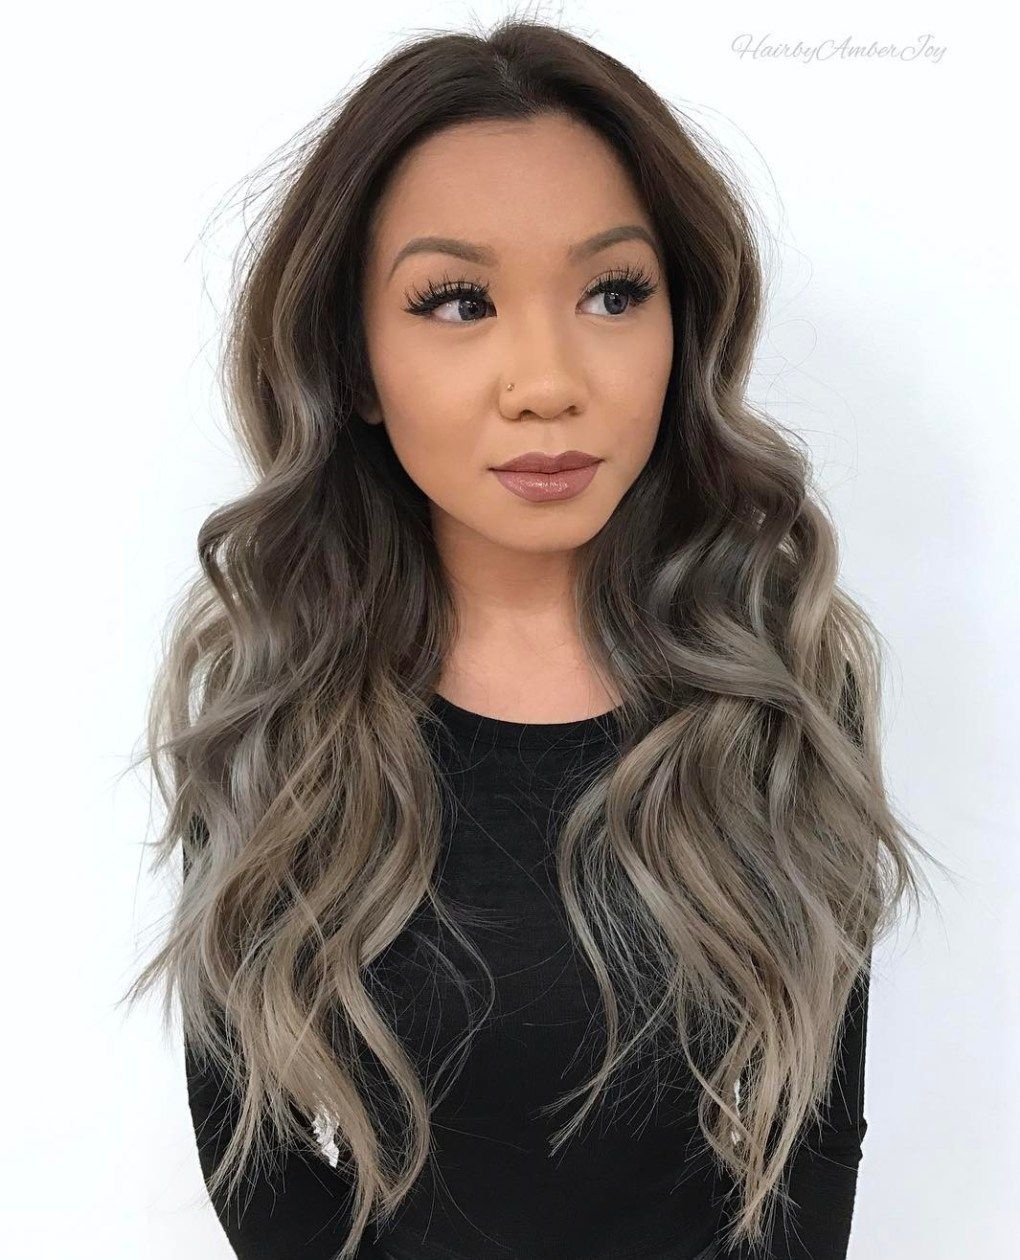 30 Modern Asian Hairstyles For Women And Girls In 2019 | Hair&amp;amp;makeup in Amazing Asian Hairstyles And Colors